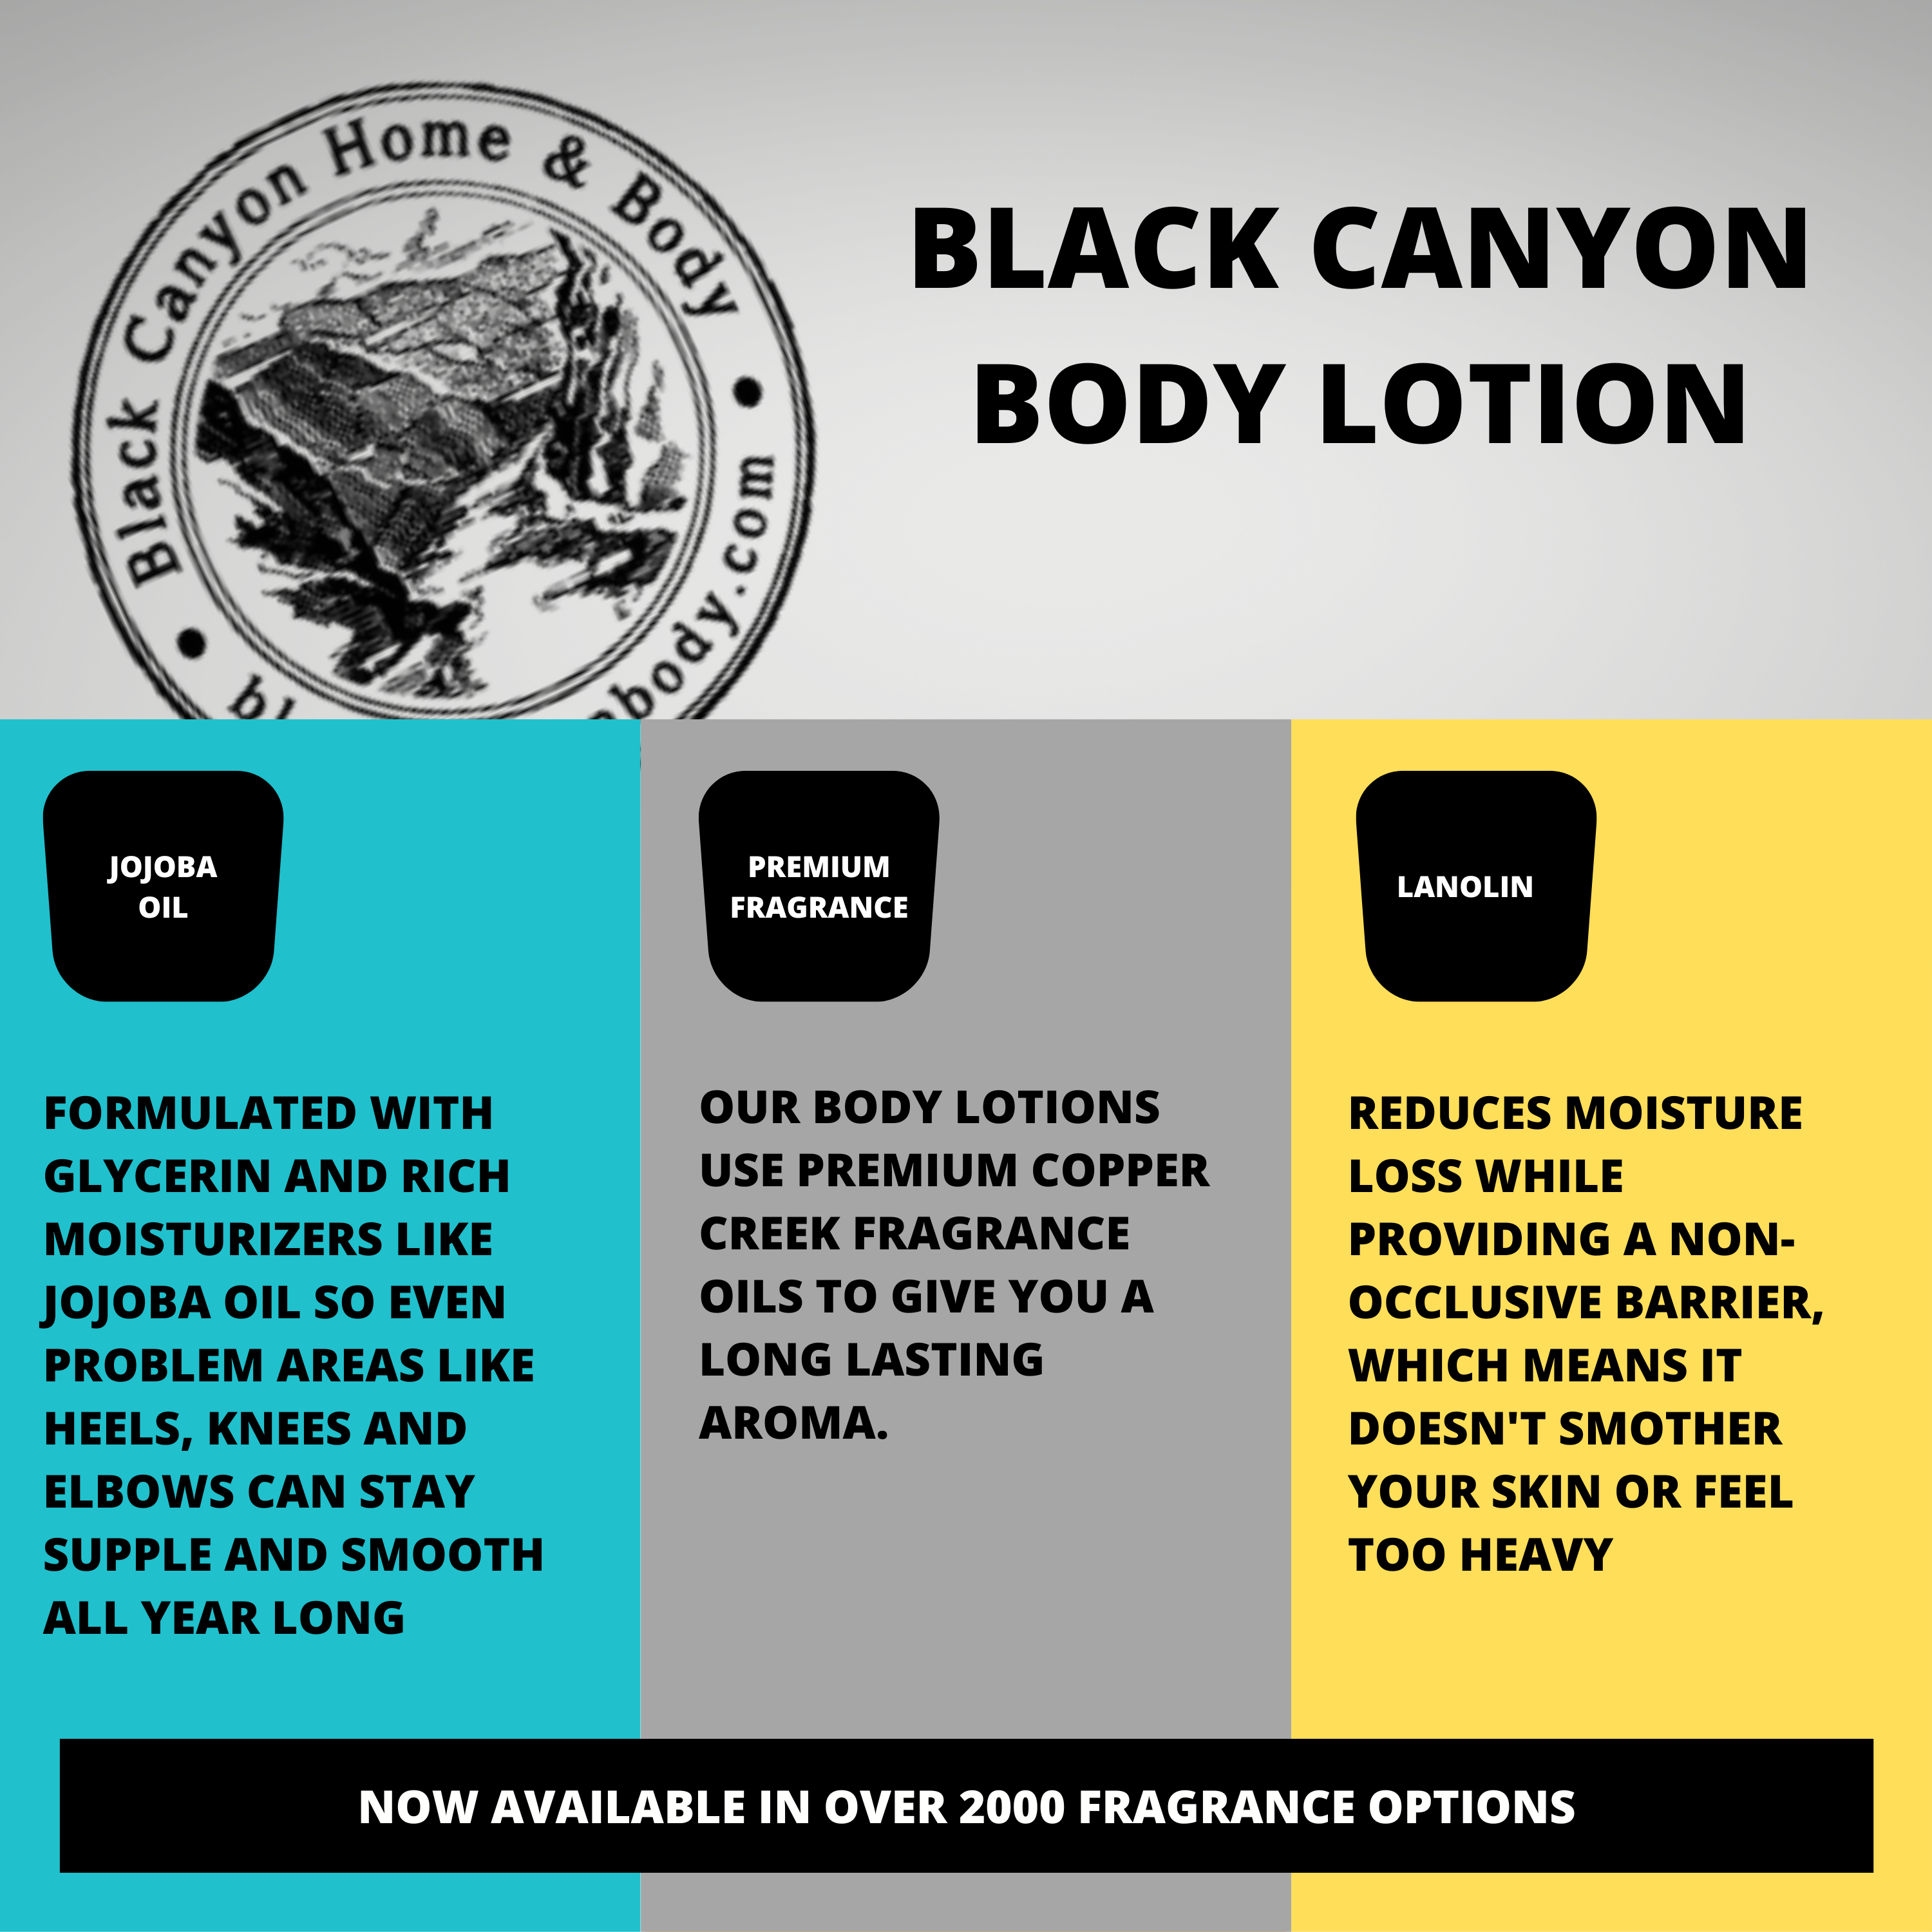 Black Canyon Wet Wet Watermelon Scented Luxury Body Lotion with Lanolin and Jojoba Oil